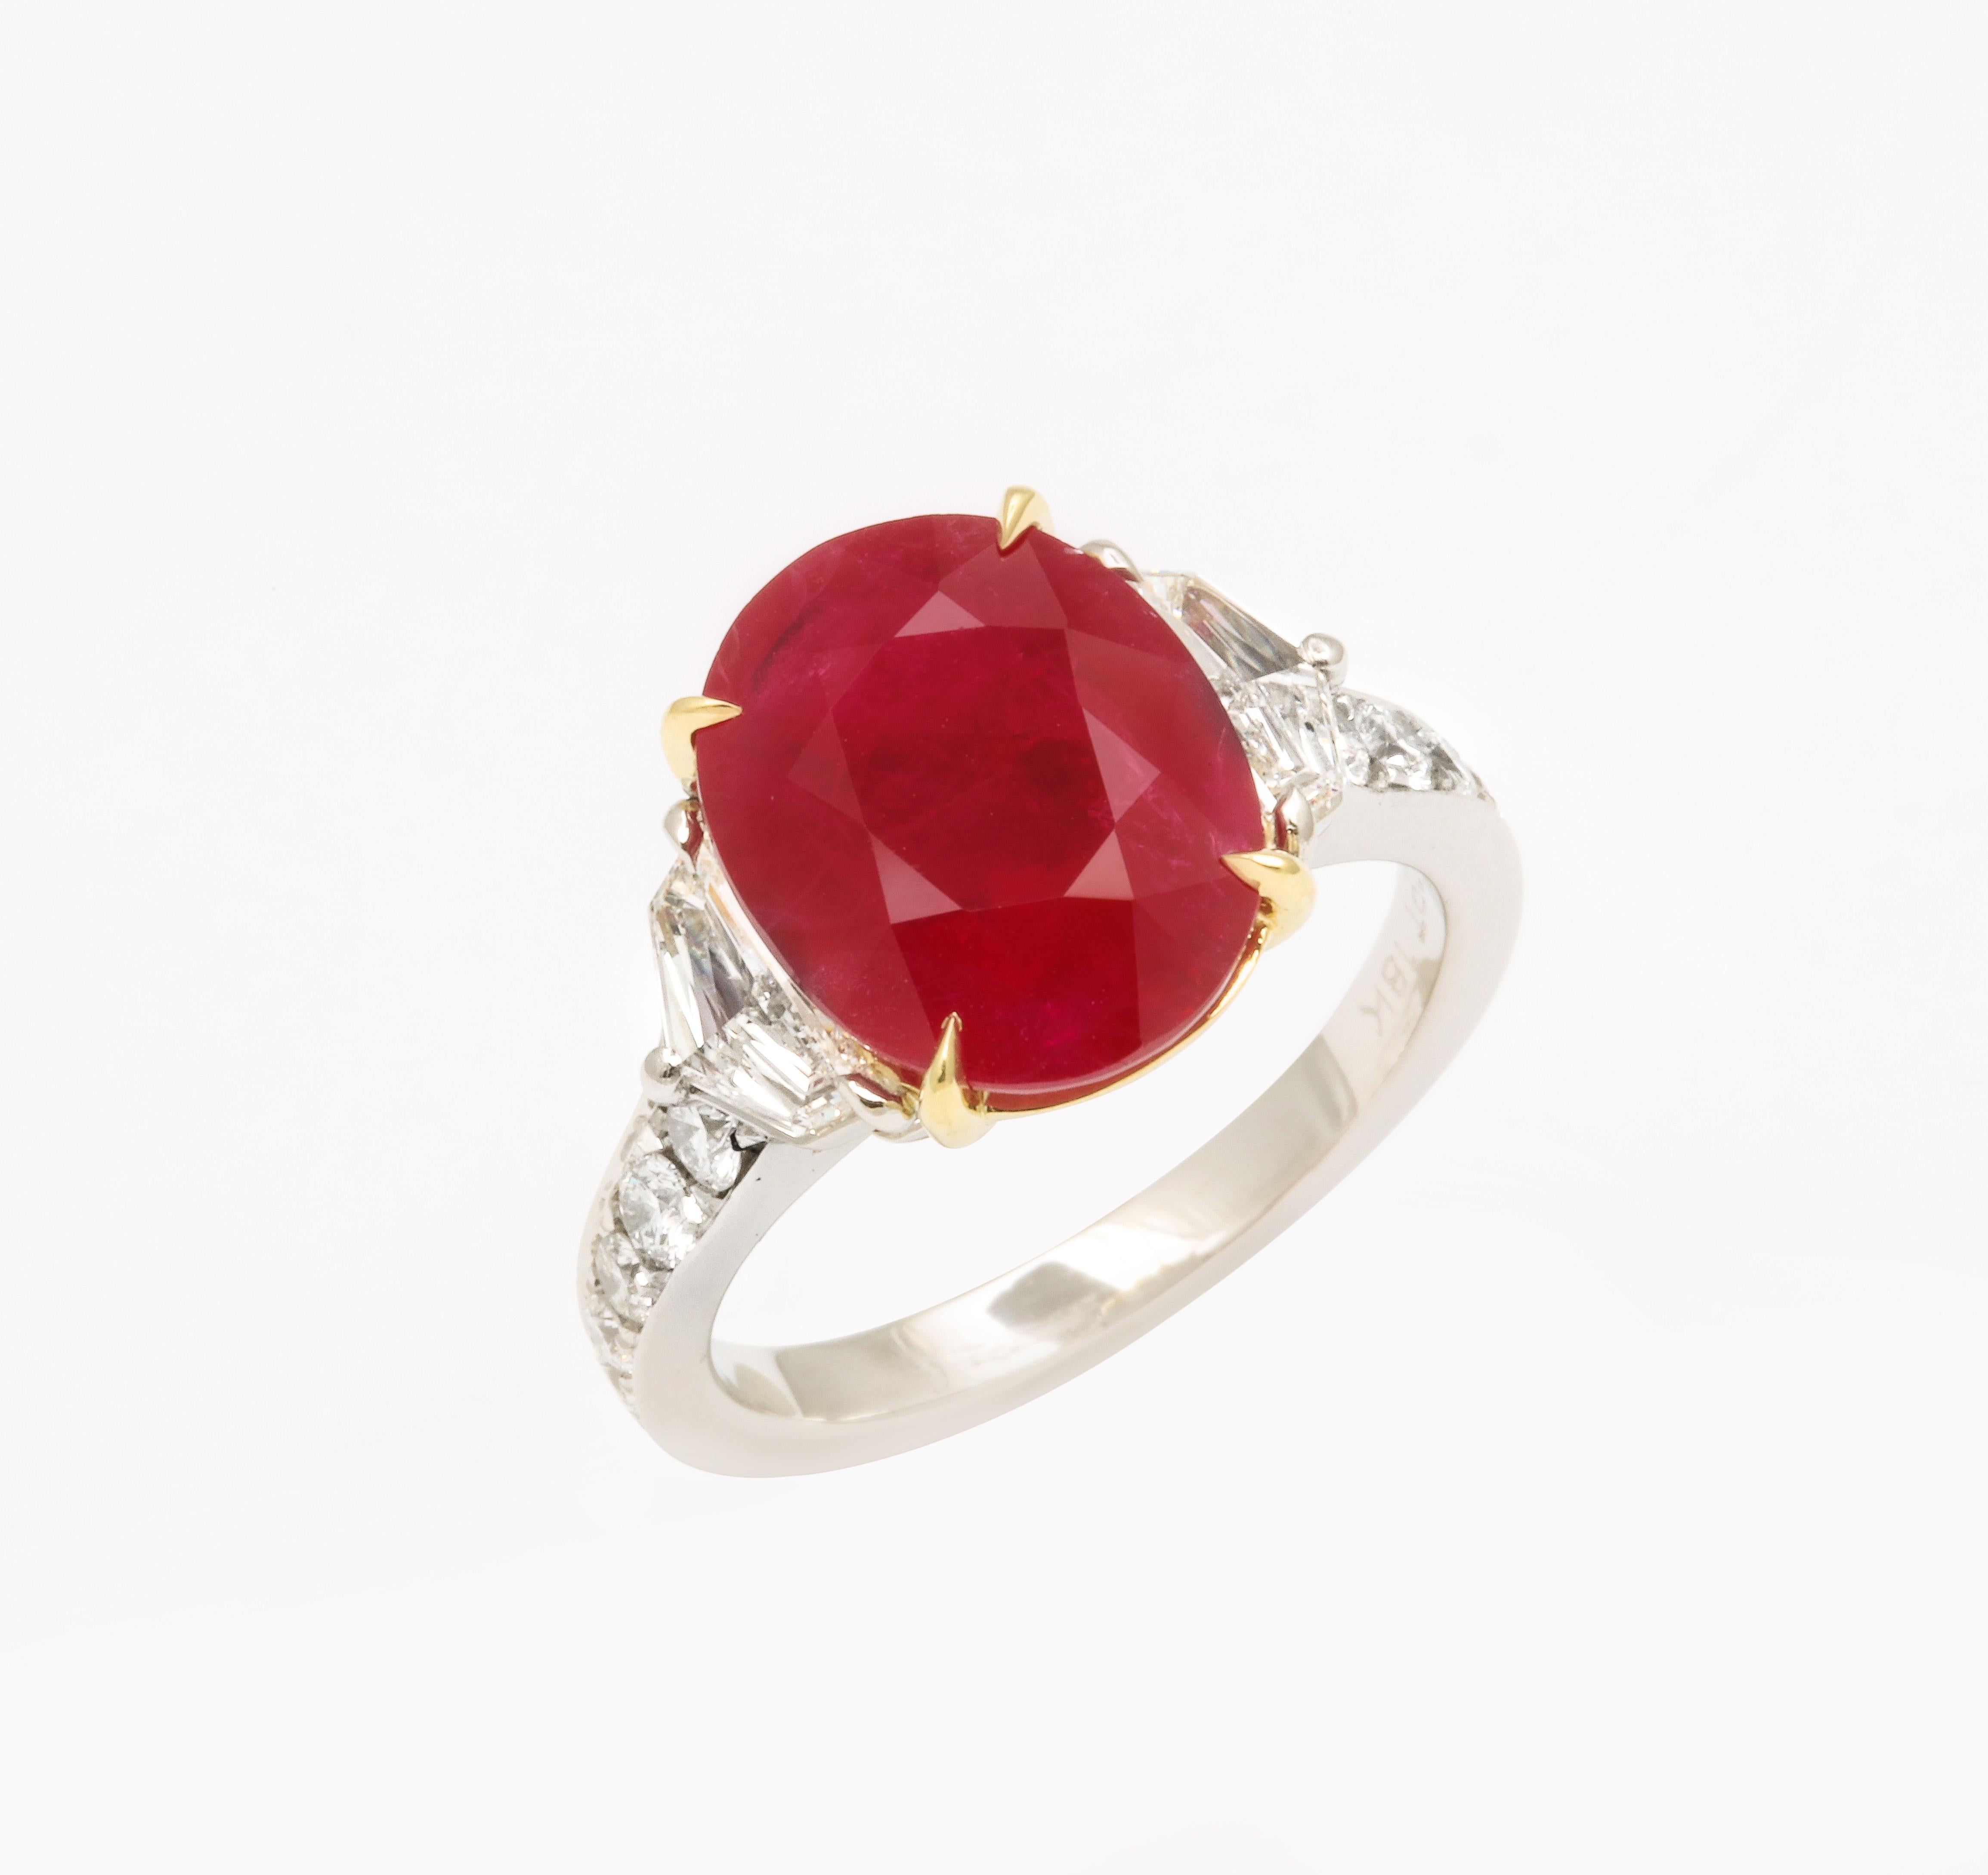 5 Carat Burma Ruby and Diamond Ring For Sale 4